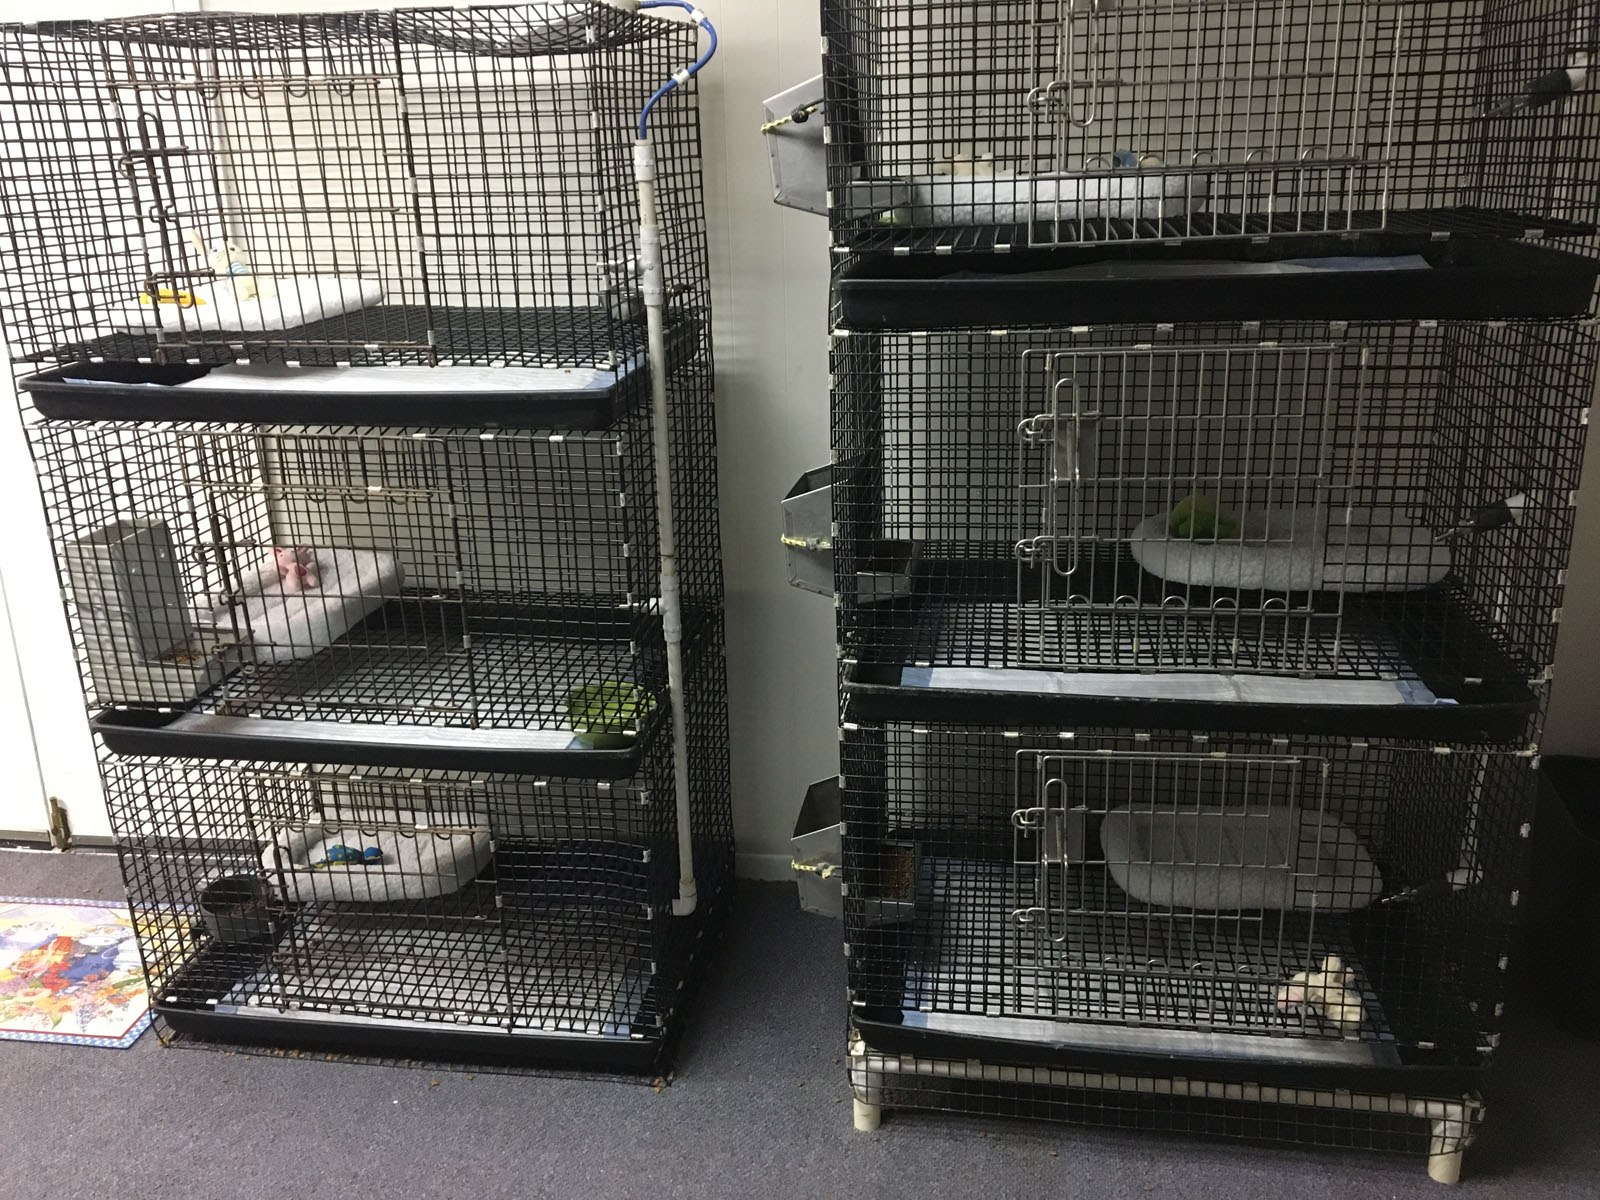 Pet store owner Roger Kummer said he and his fiance arrived to find the empty cages Sunday night. Missing were six dogs which sell for anywhere between $800 and $1,100 dollars. (Courtesy Roger Kummer)